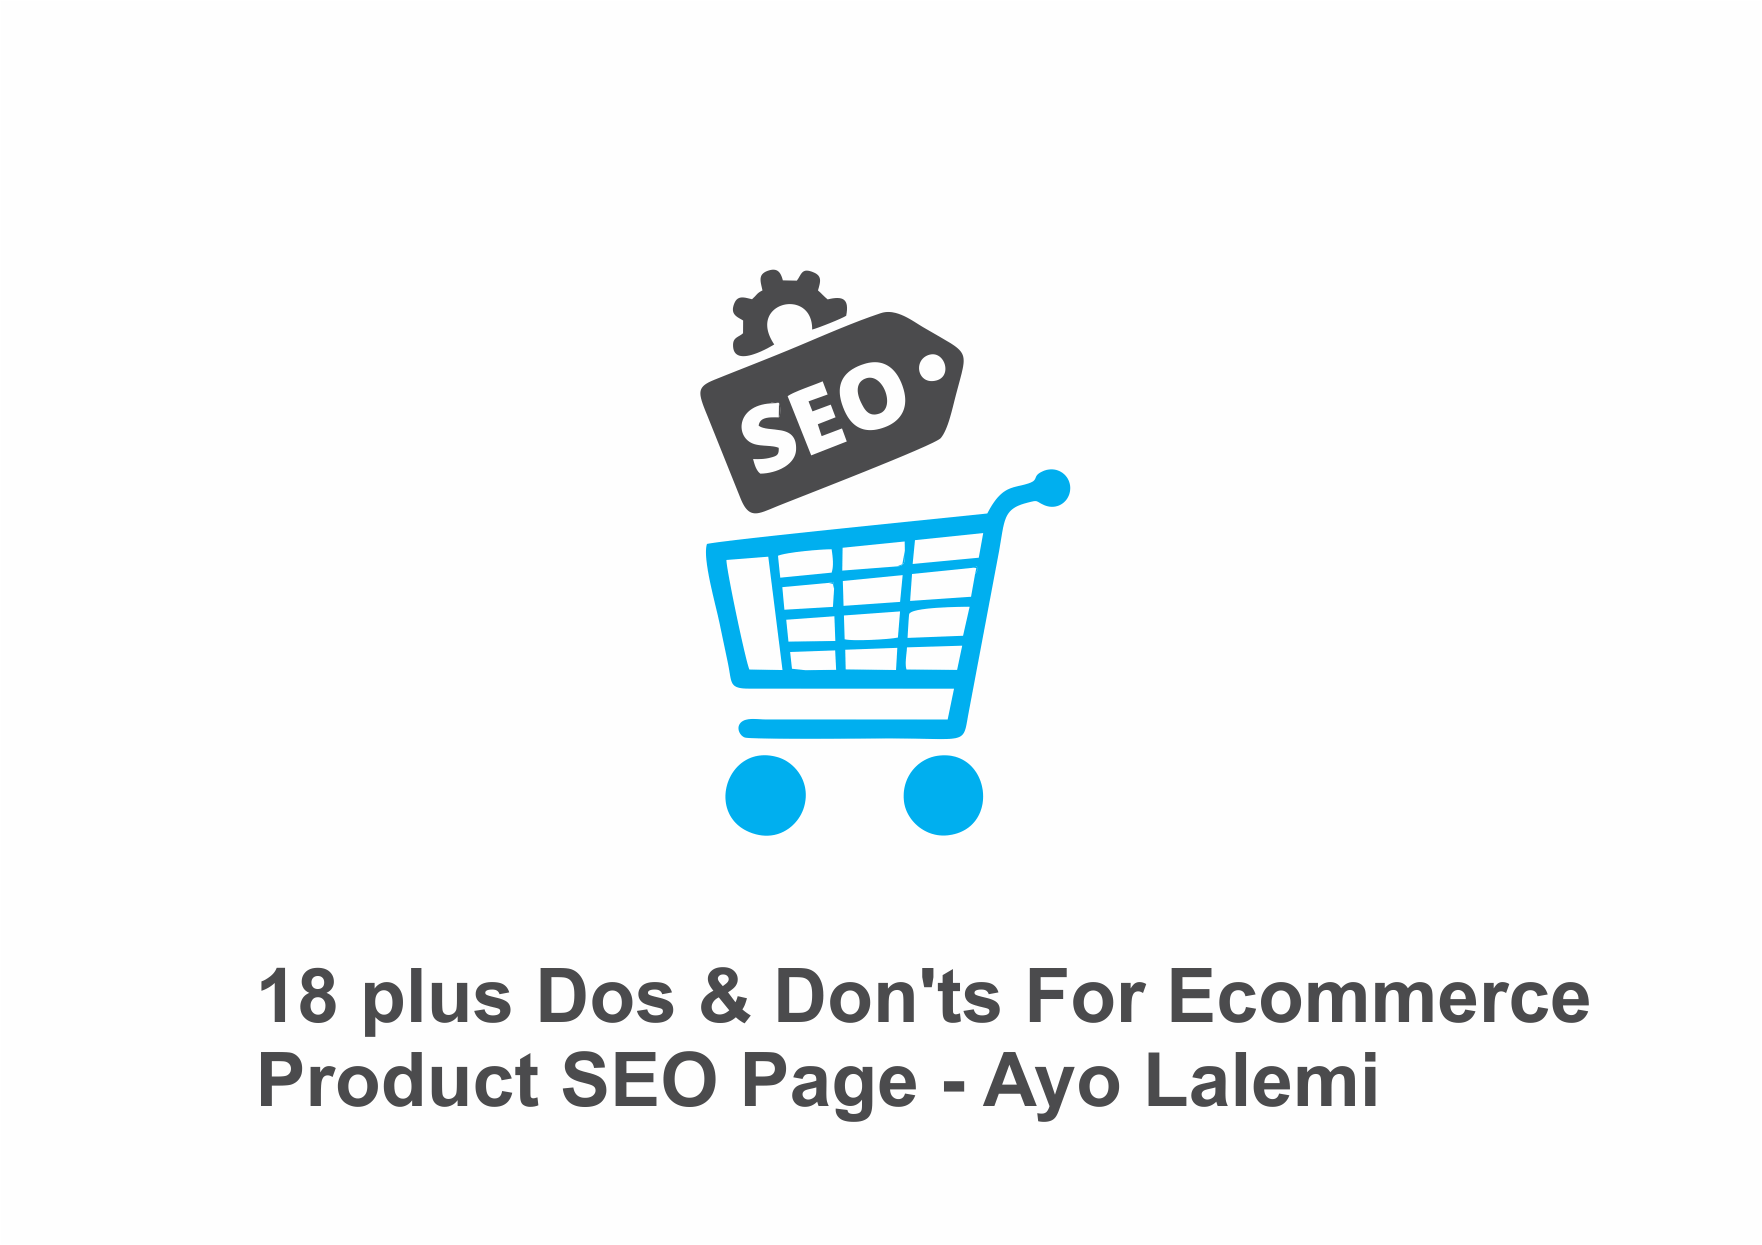 18 plus Dos & Don'ts For Ecommerce Product SEO Page